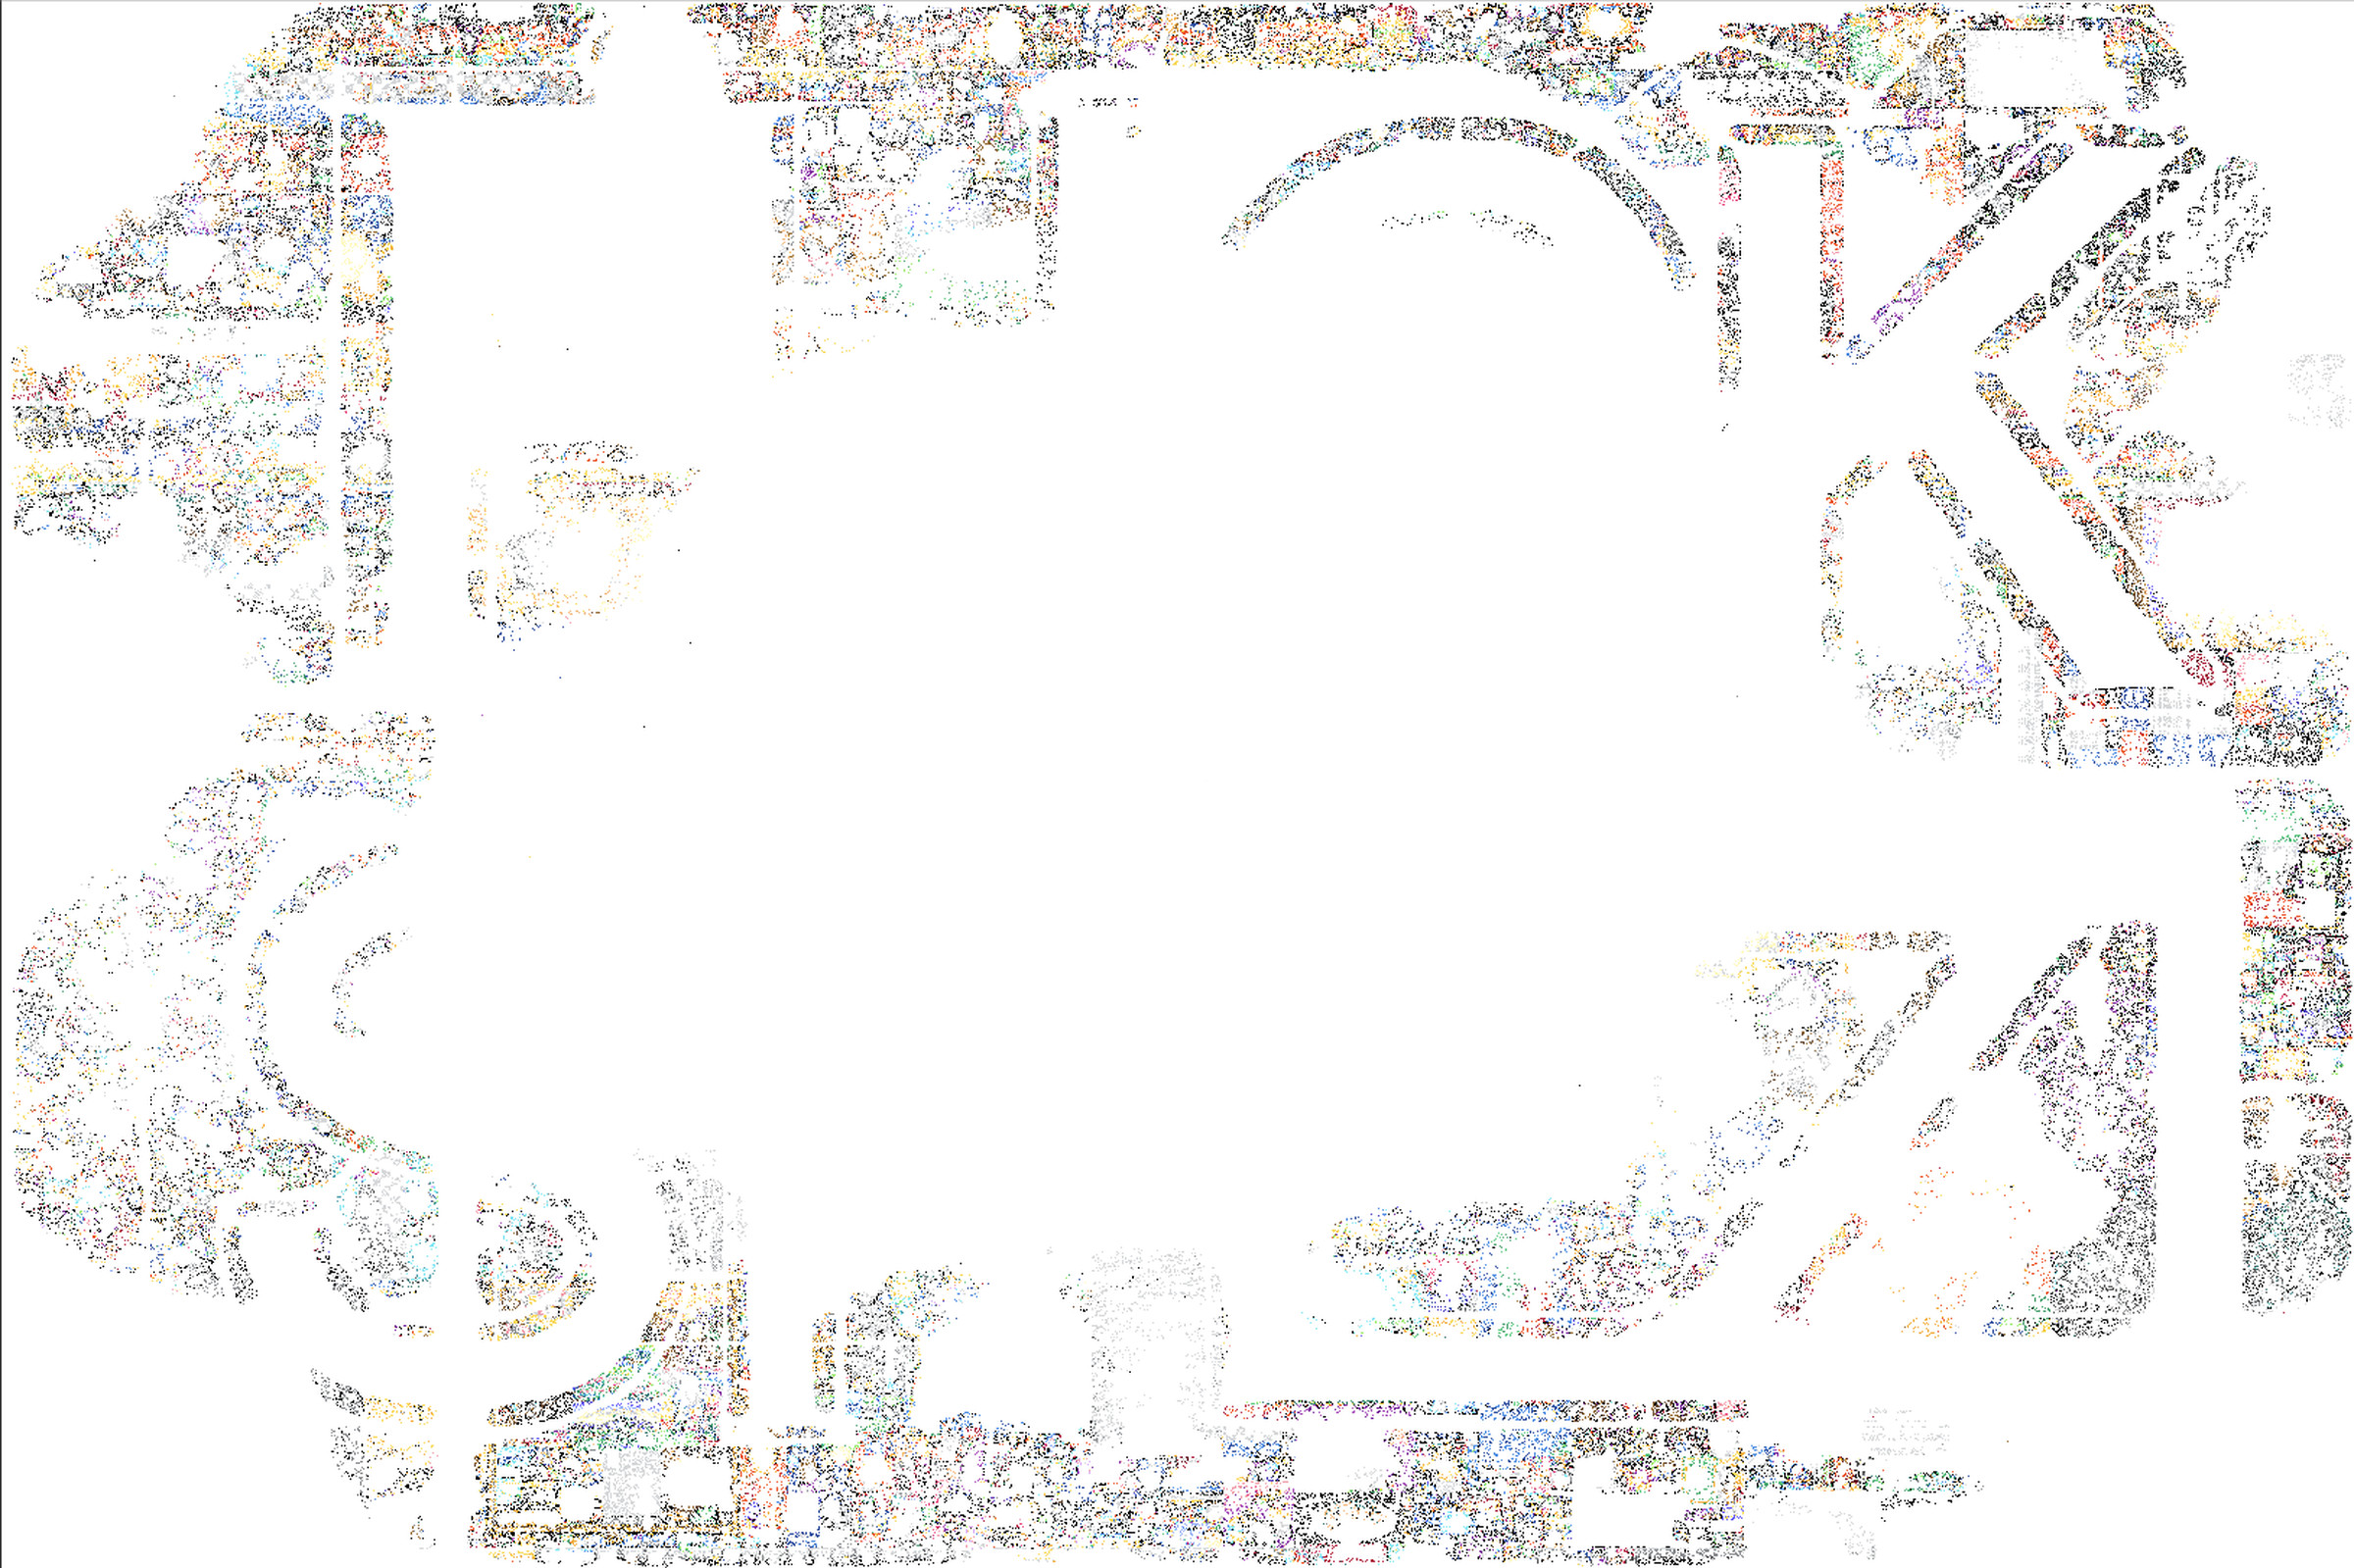 A screenshot of r/Place with a growing amount of white. In the middle, there are the final remnants of a large message that says “FUCK SPEZ.”